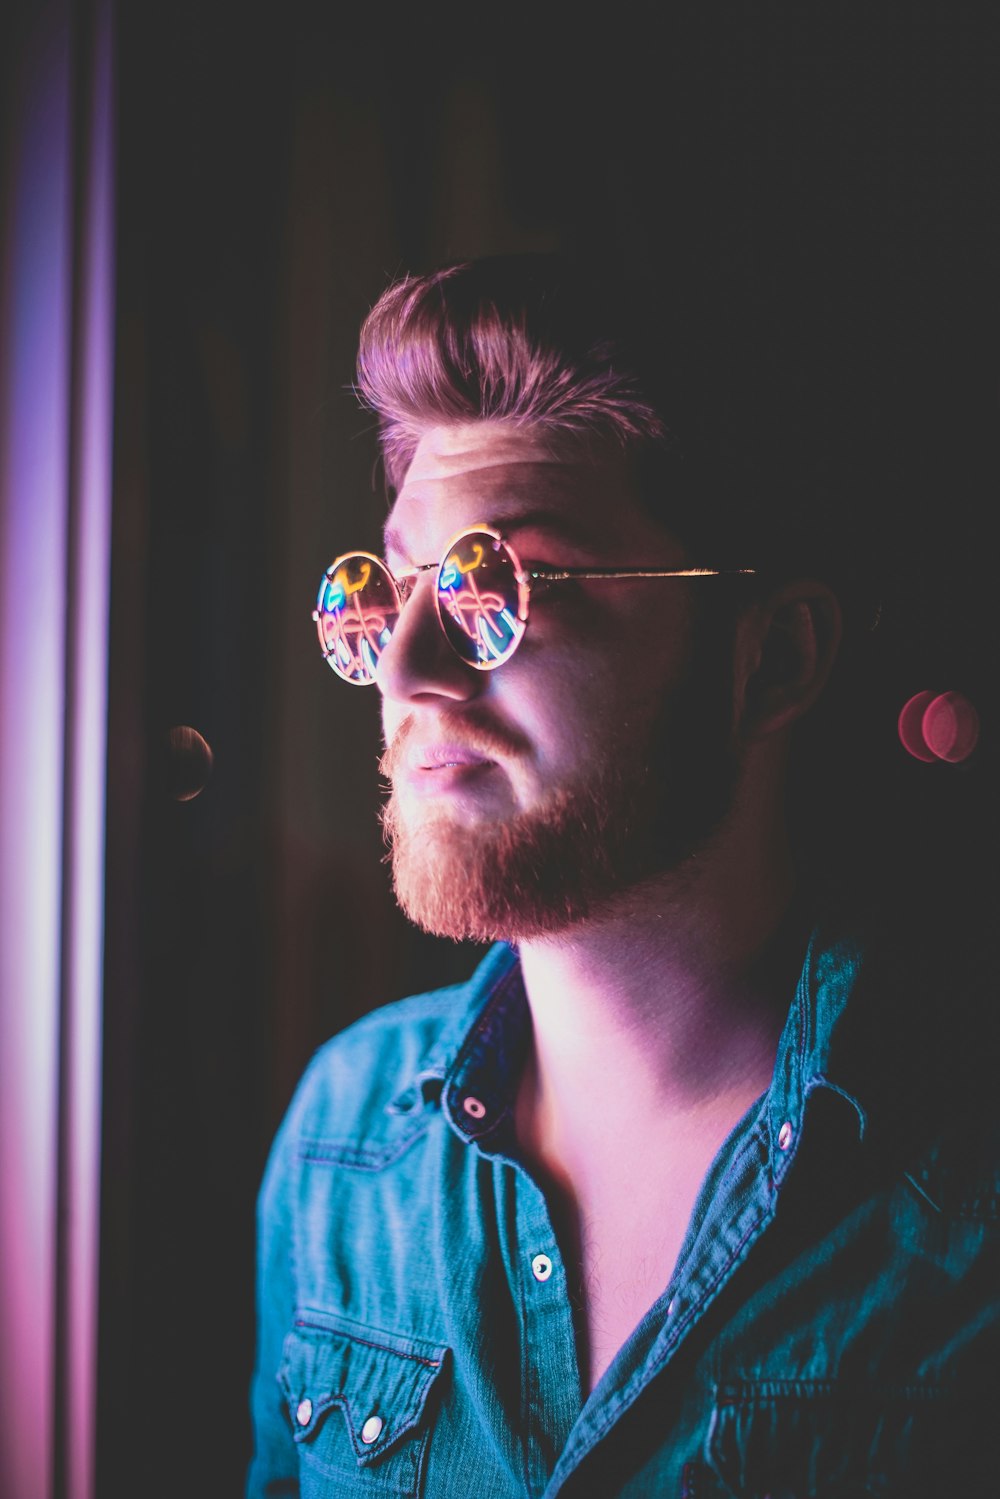 man wearing sunglasses at dim lighted room